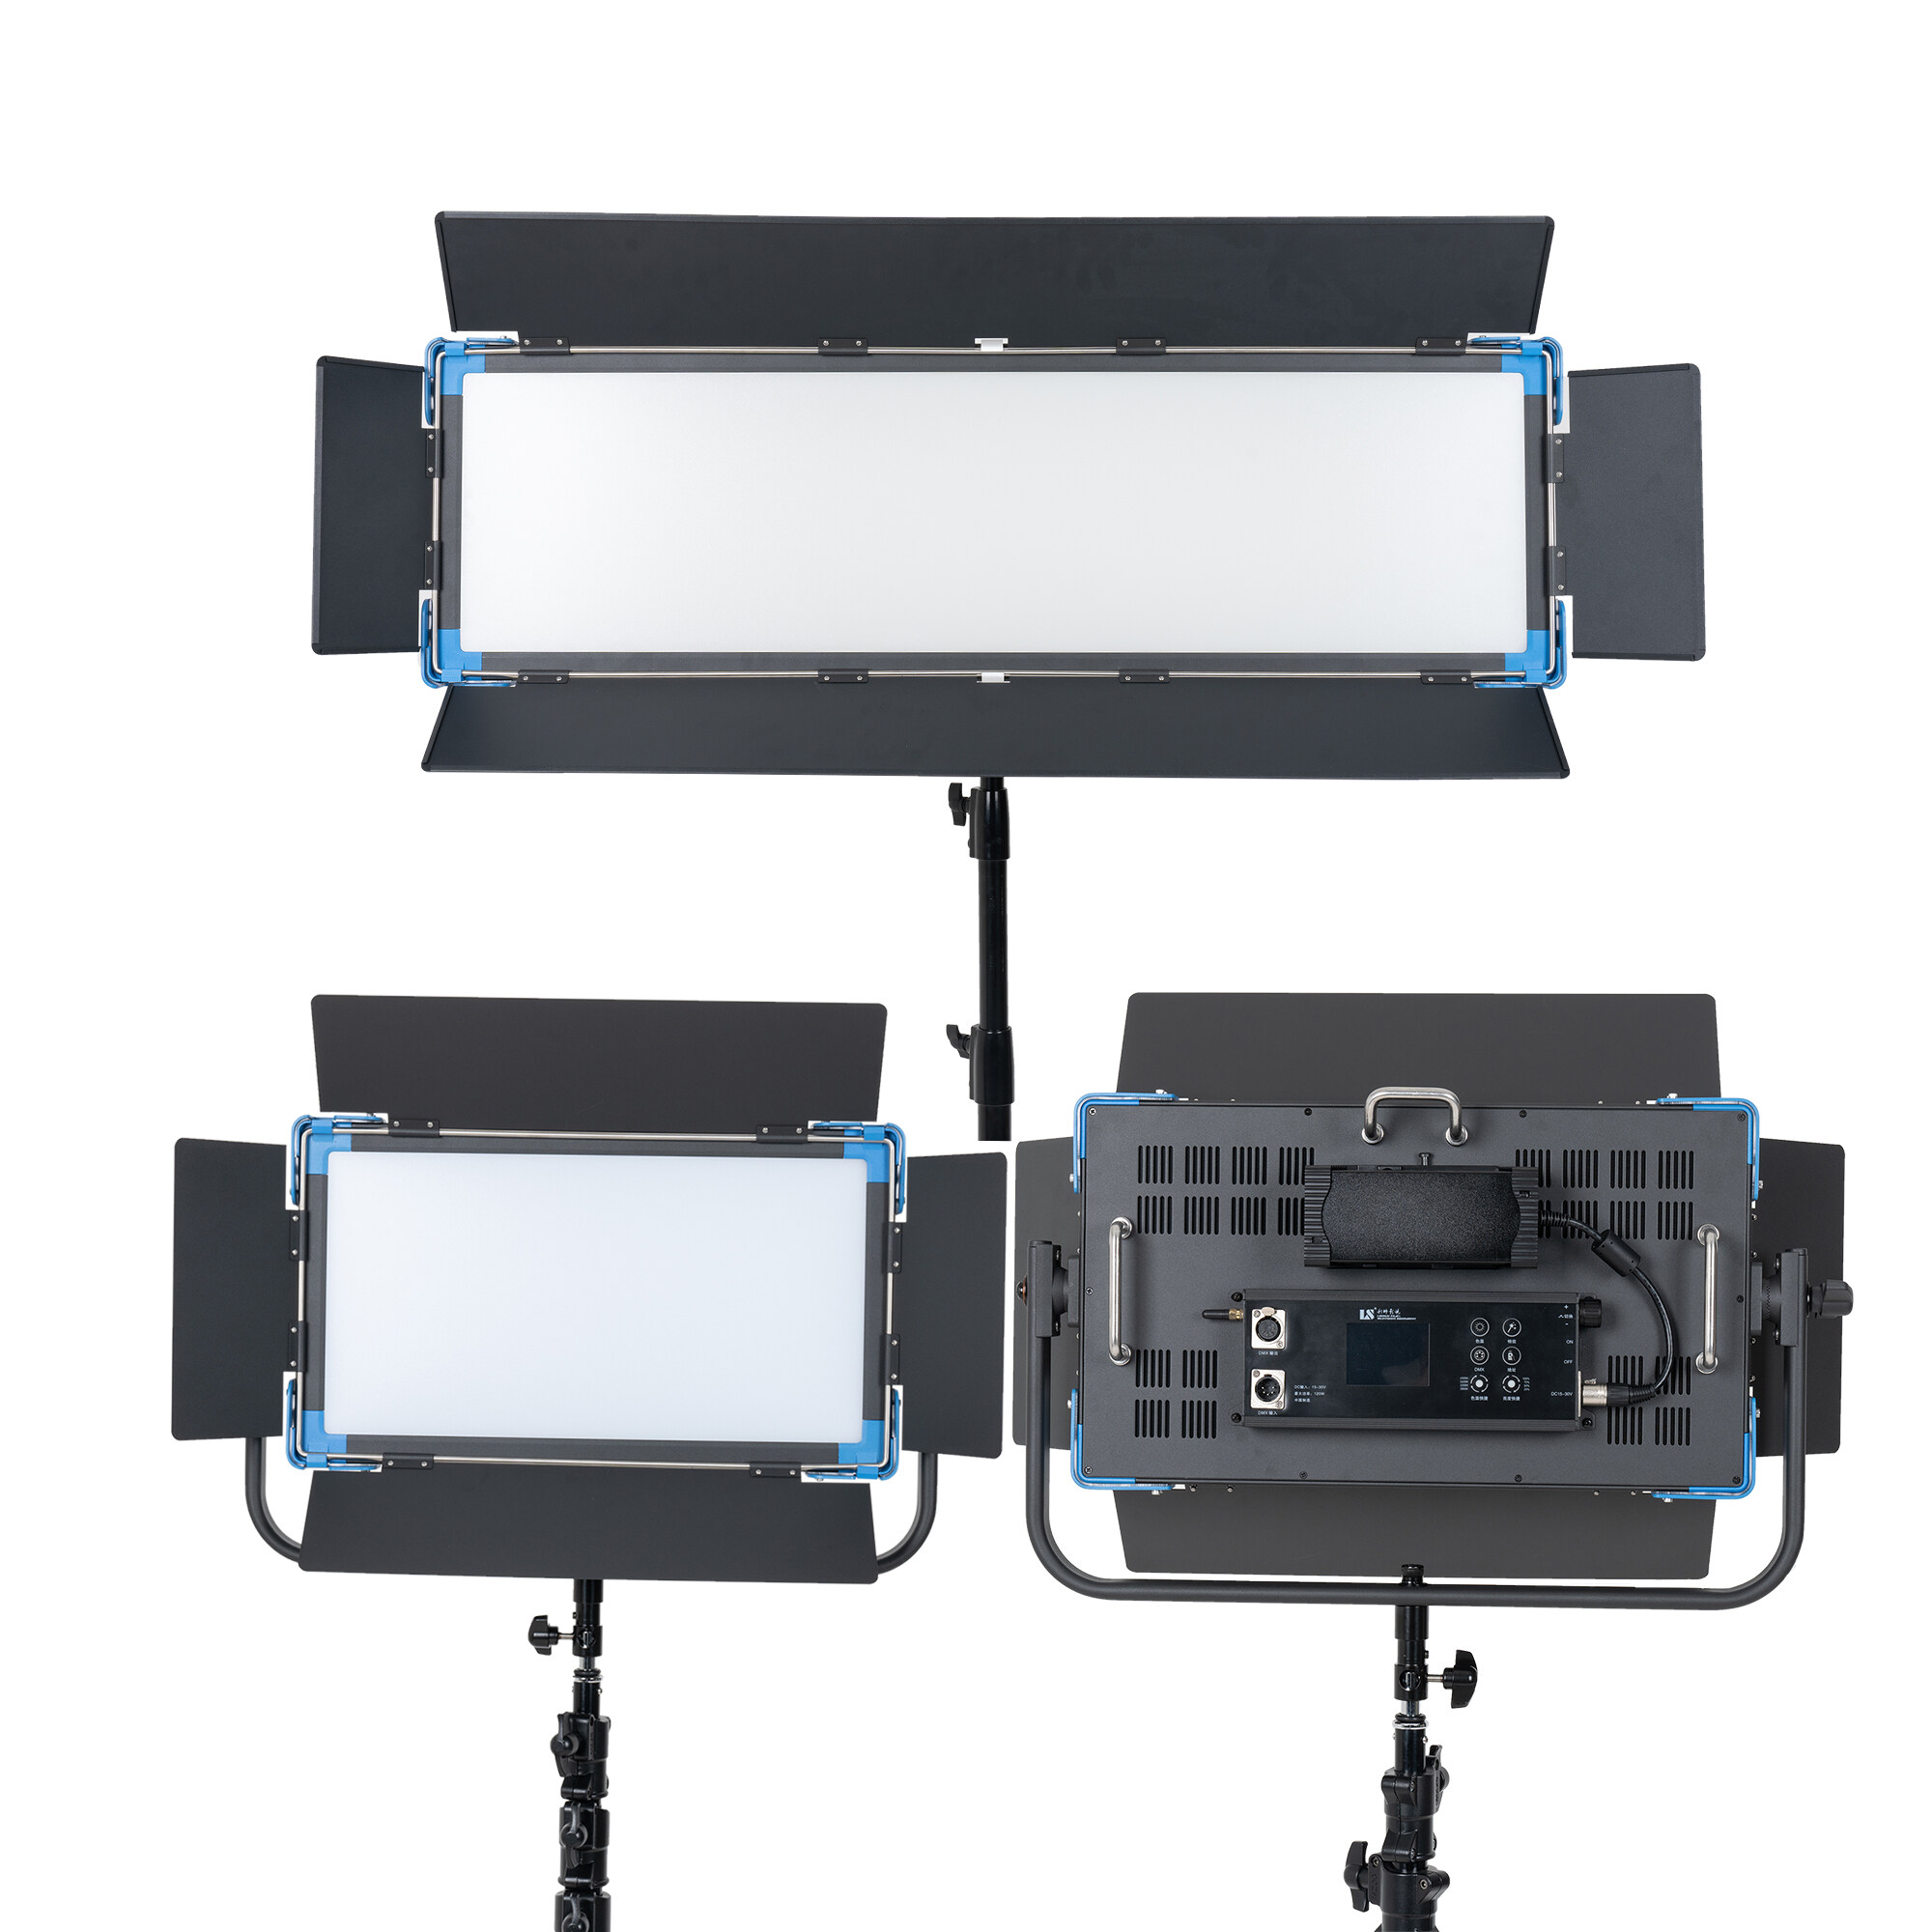 120W C200 high power Studio LED Panel light with LCD Screen,200W C400 high power Studio LED Panel light with LCD Screen,LS 120W P-1580ASVL LED Studio and Video Panel Light,LS 100W P-1380ASVL Photo and Studio LED Panel Light,LS 160W P-2400ASVL High Power LED Panel Light